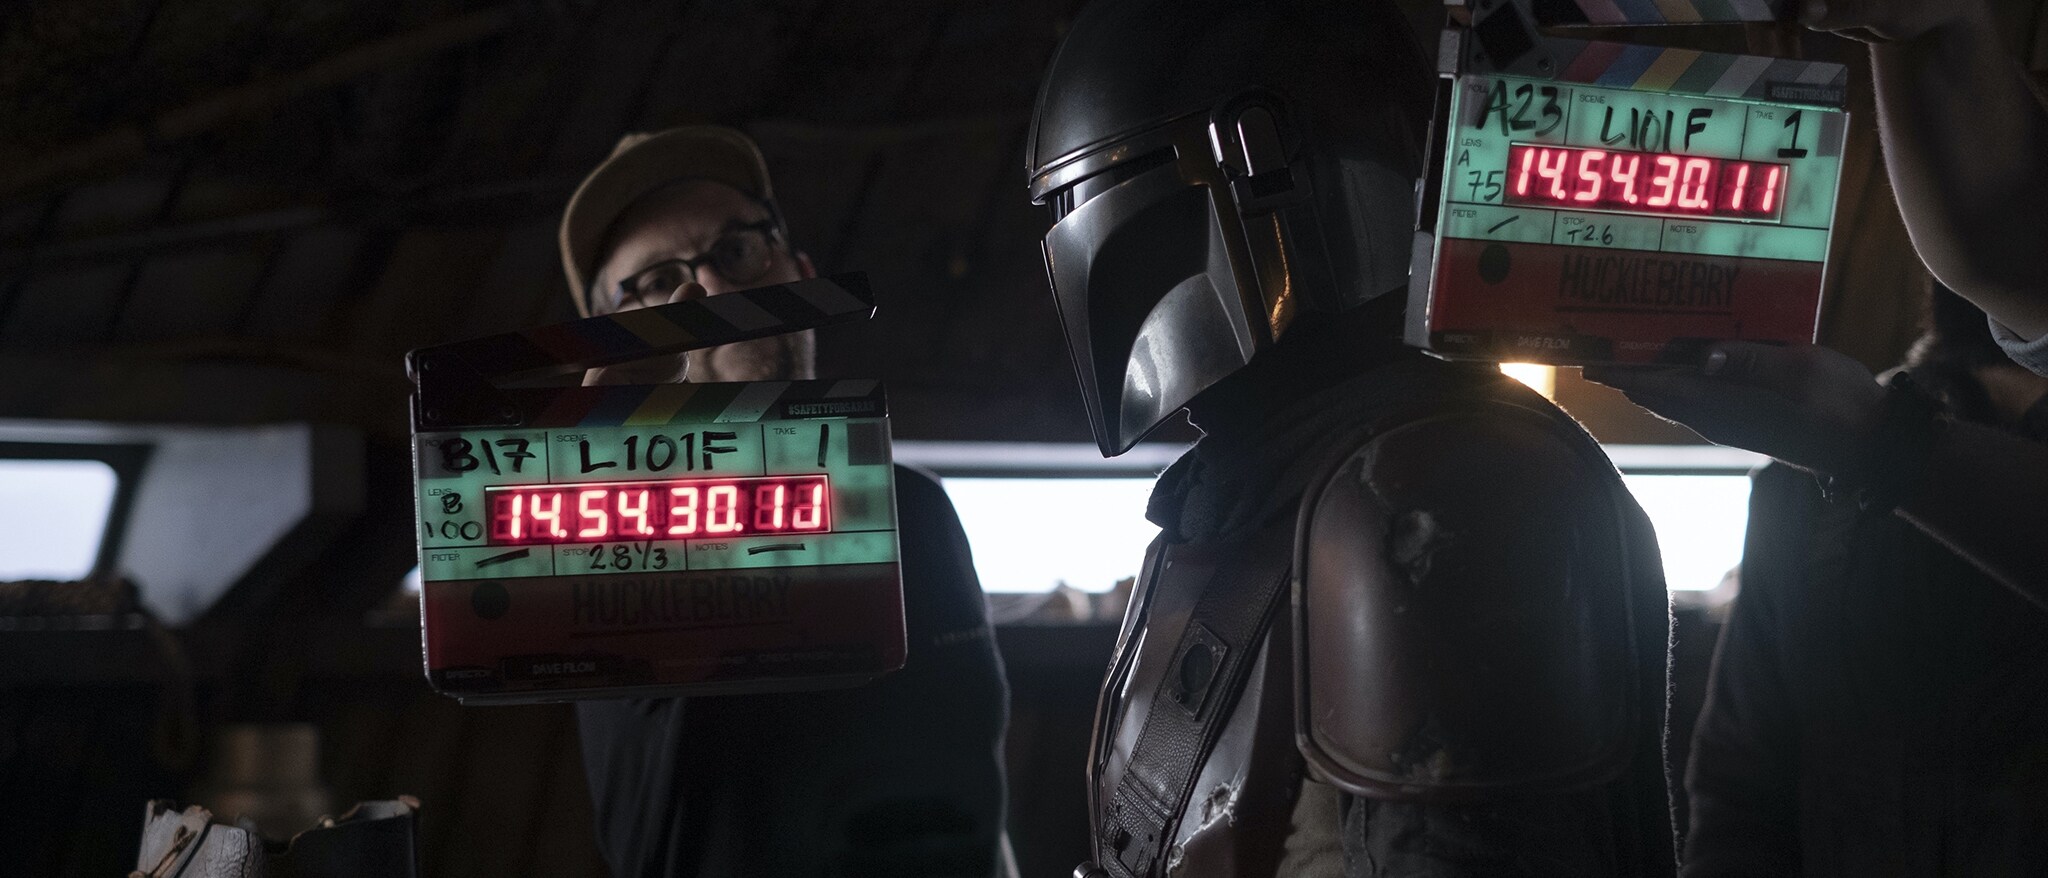 Disney Gallery: The Mandalorian - Featured Content Banner